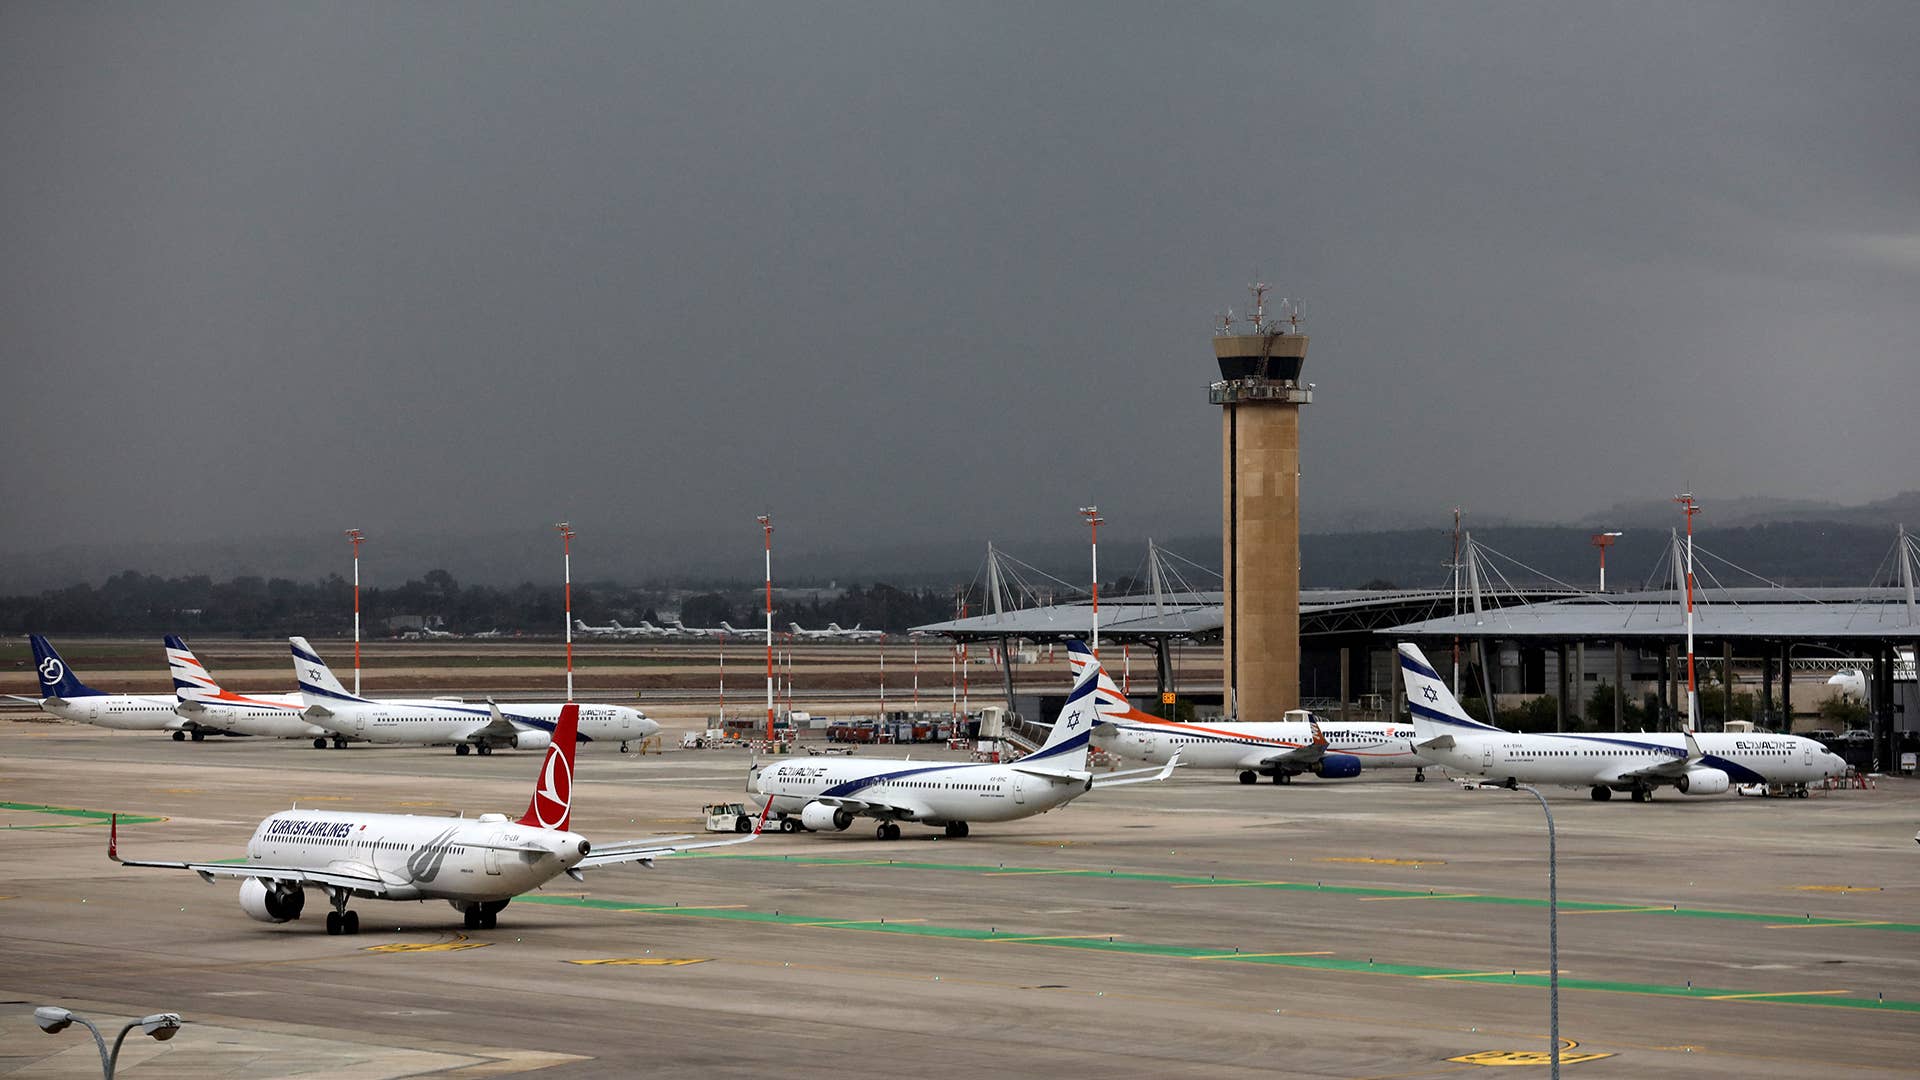 This picture taken on December 21, 2021 shows a view of aircraft at Israel's Ben Gurion Airport in Lod, east of Tel Aviv